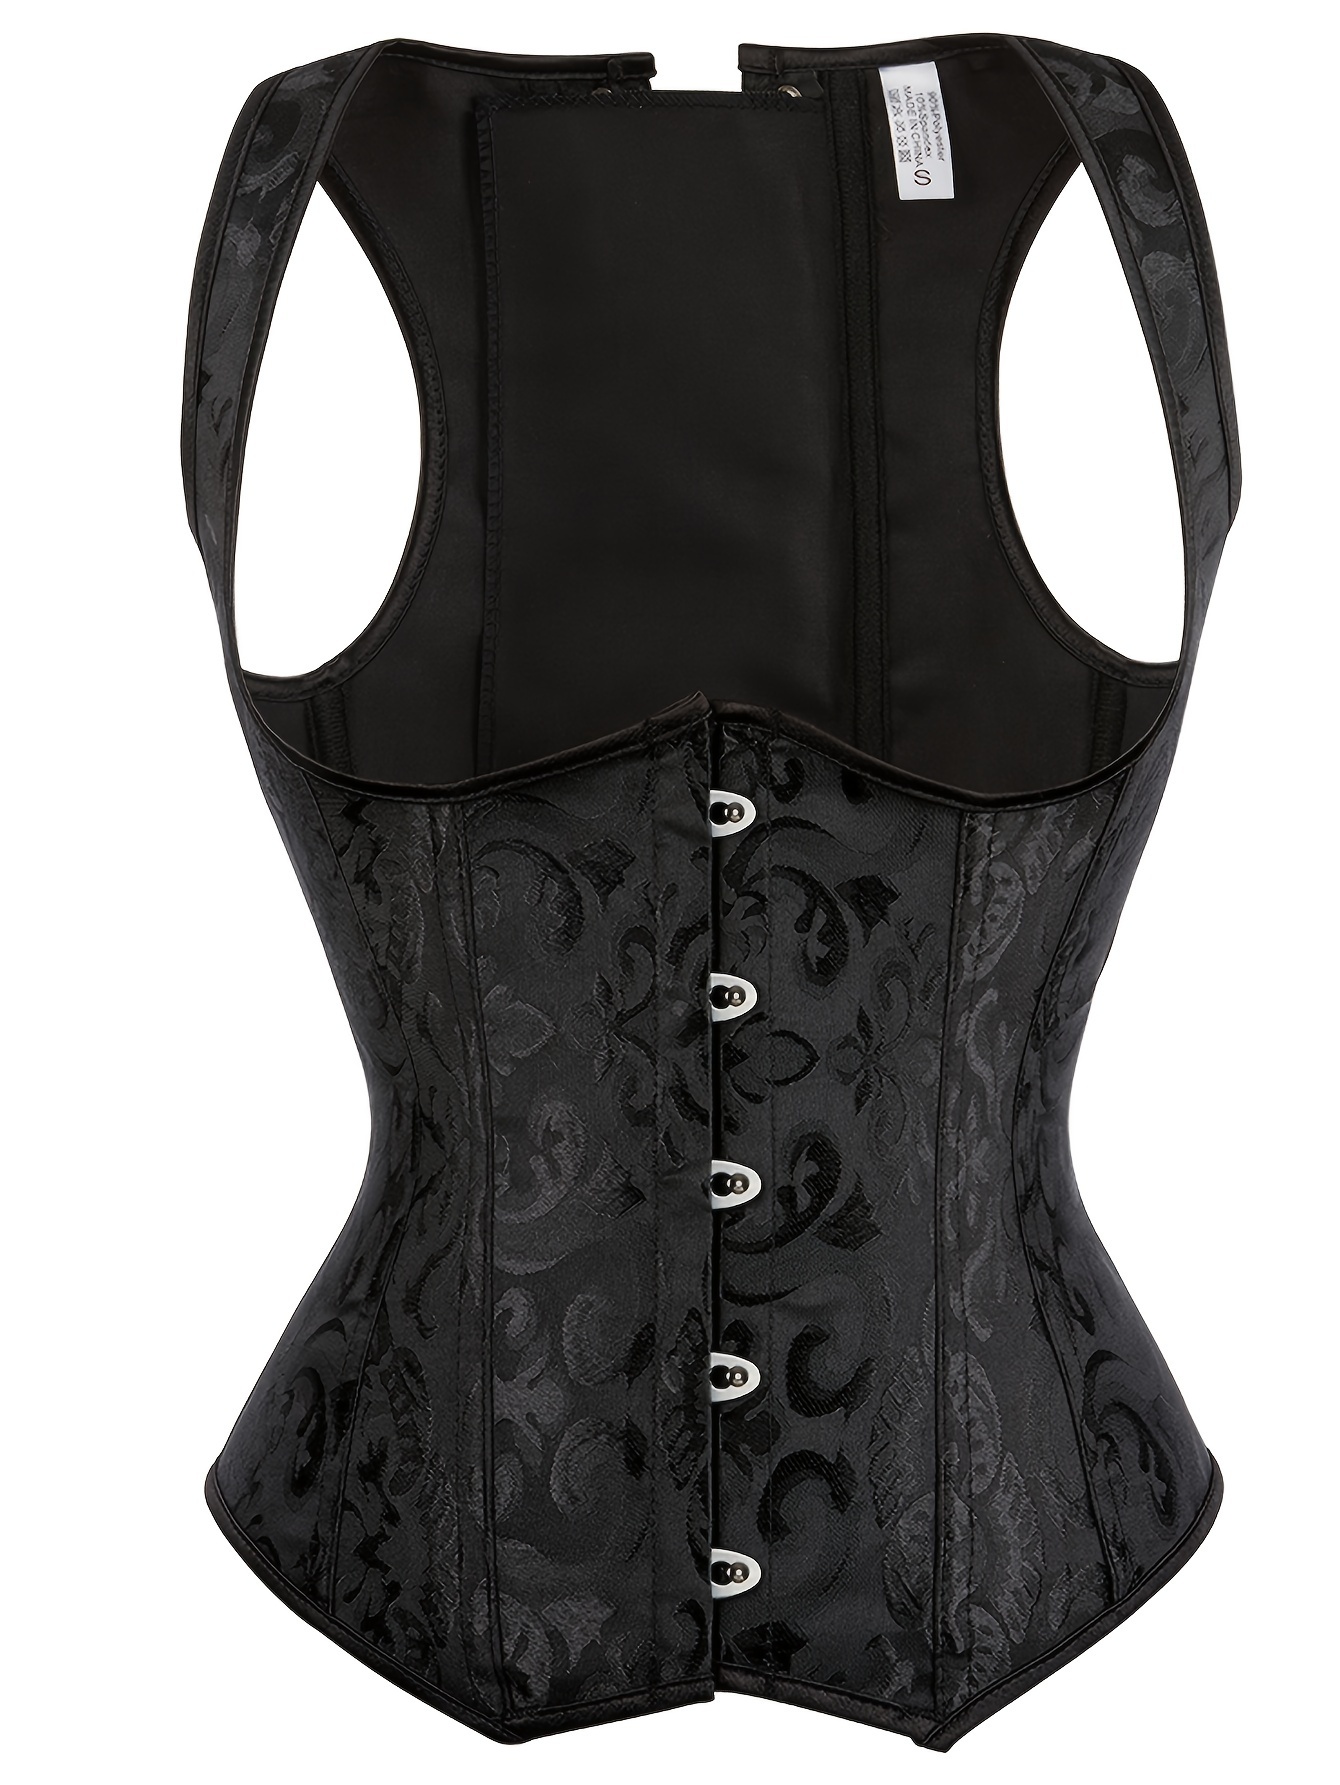  Womens Lace Up Boned Overbust Corset Bustier